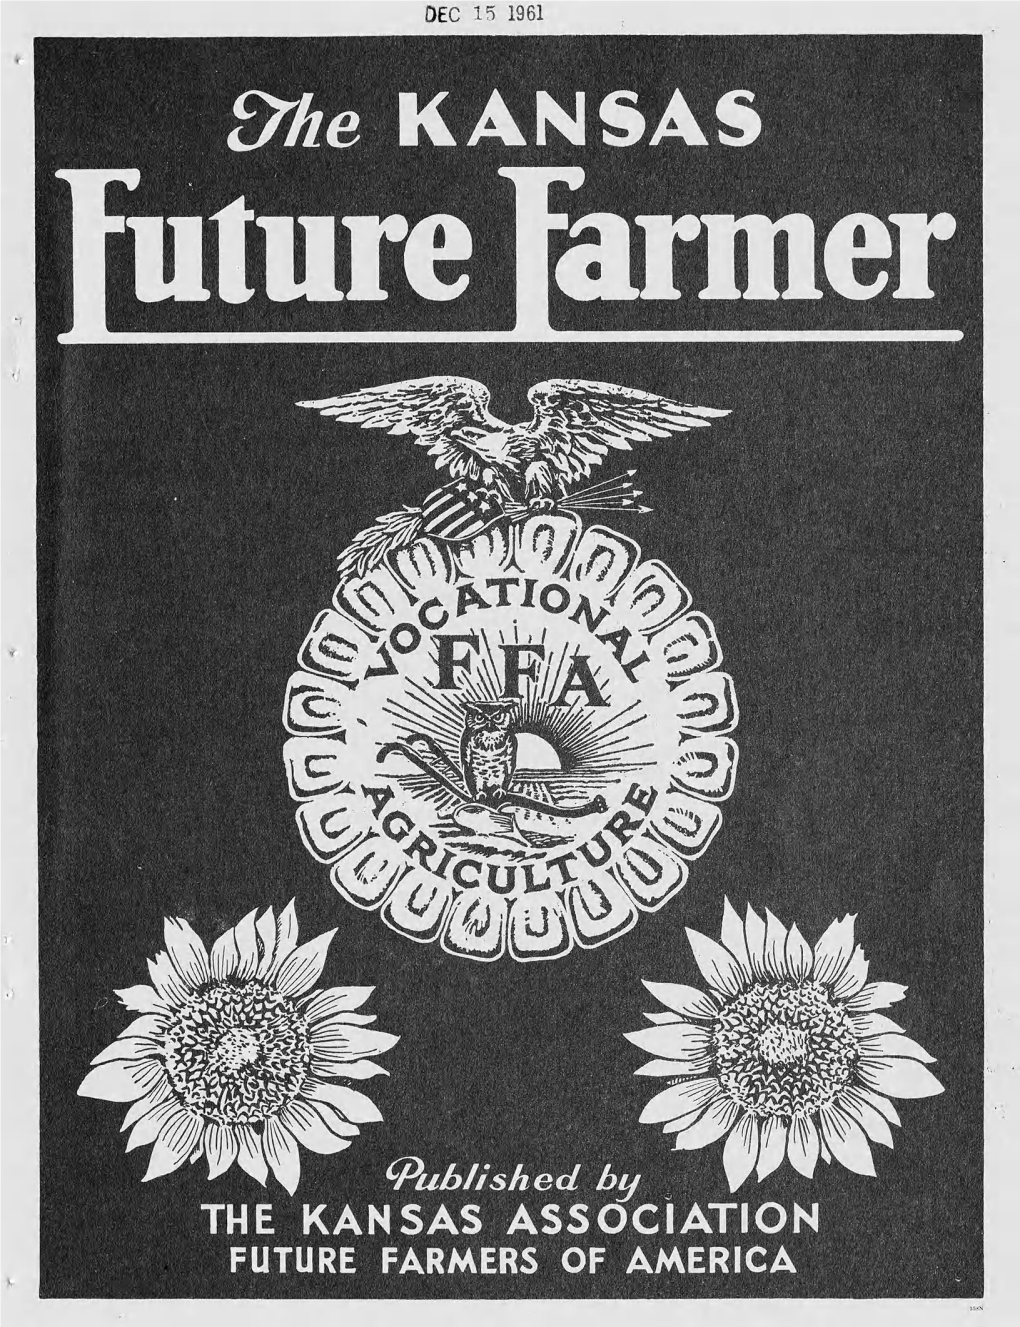 Dec 15 1961 National Officers, Future Farmers of America 1961-62